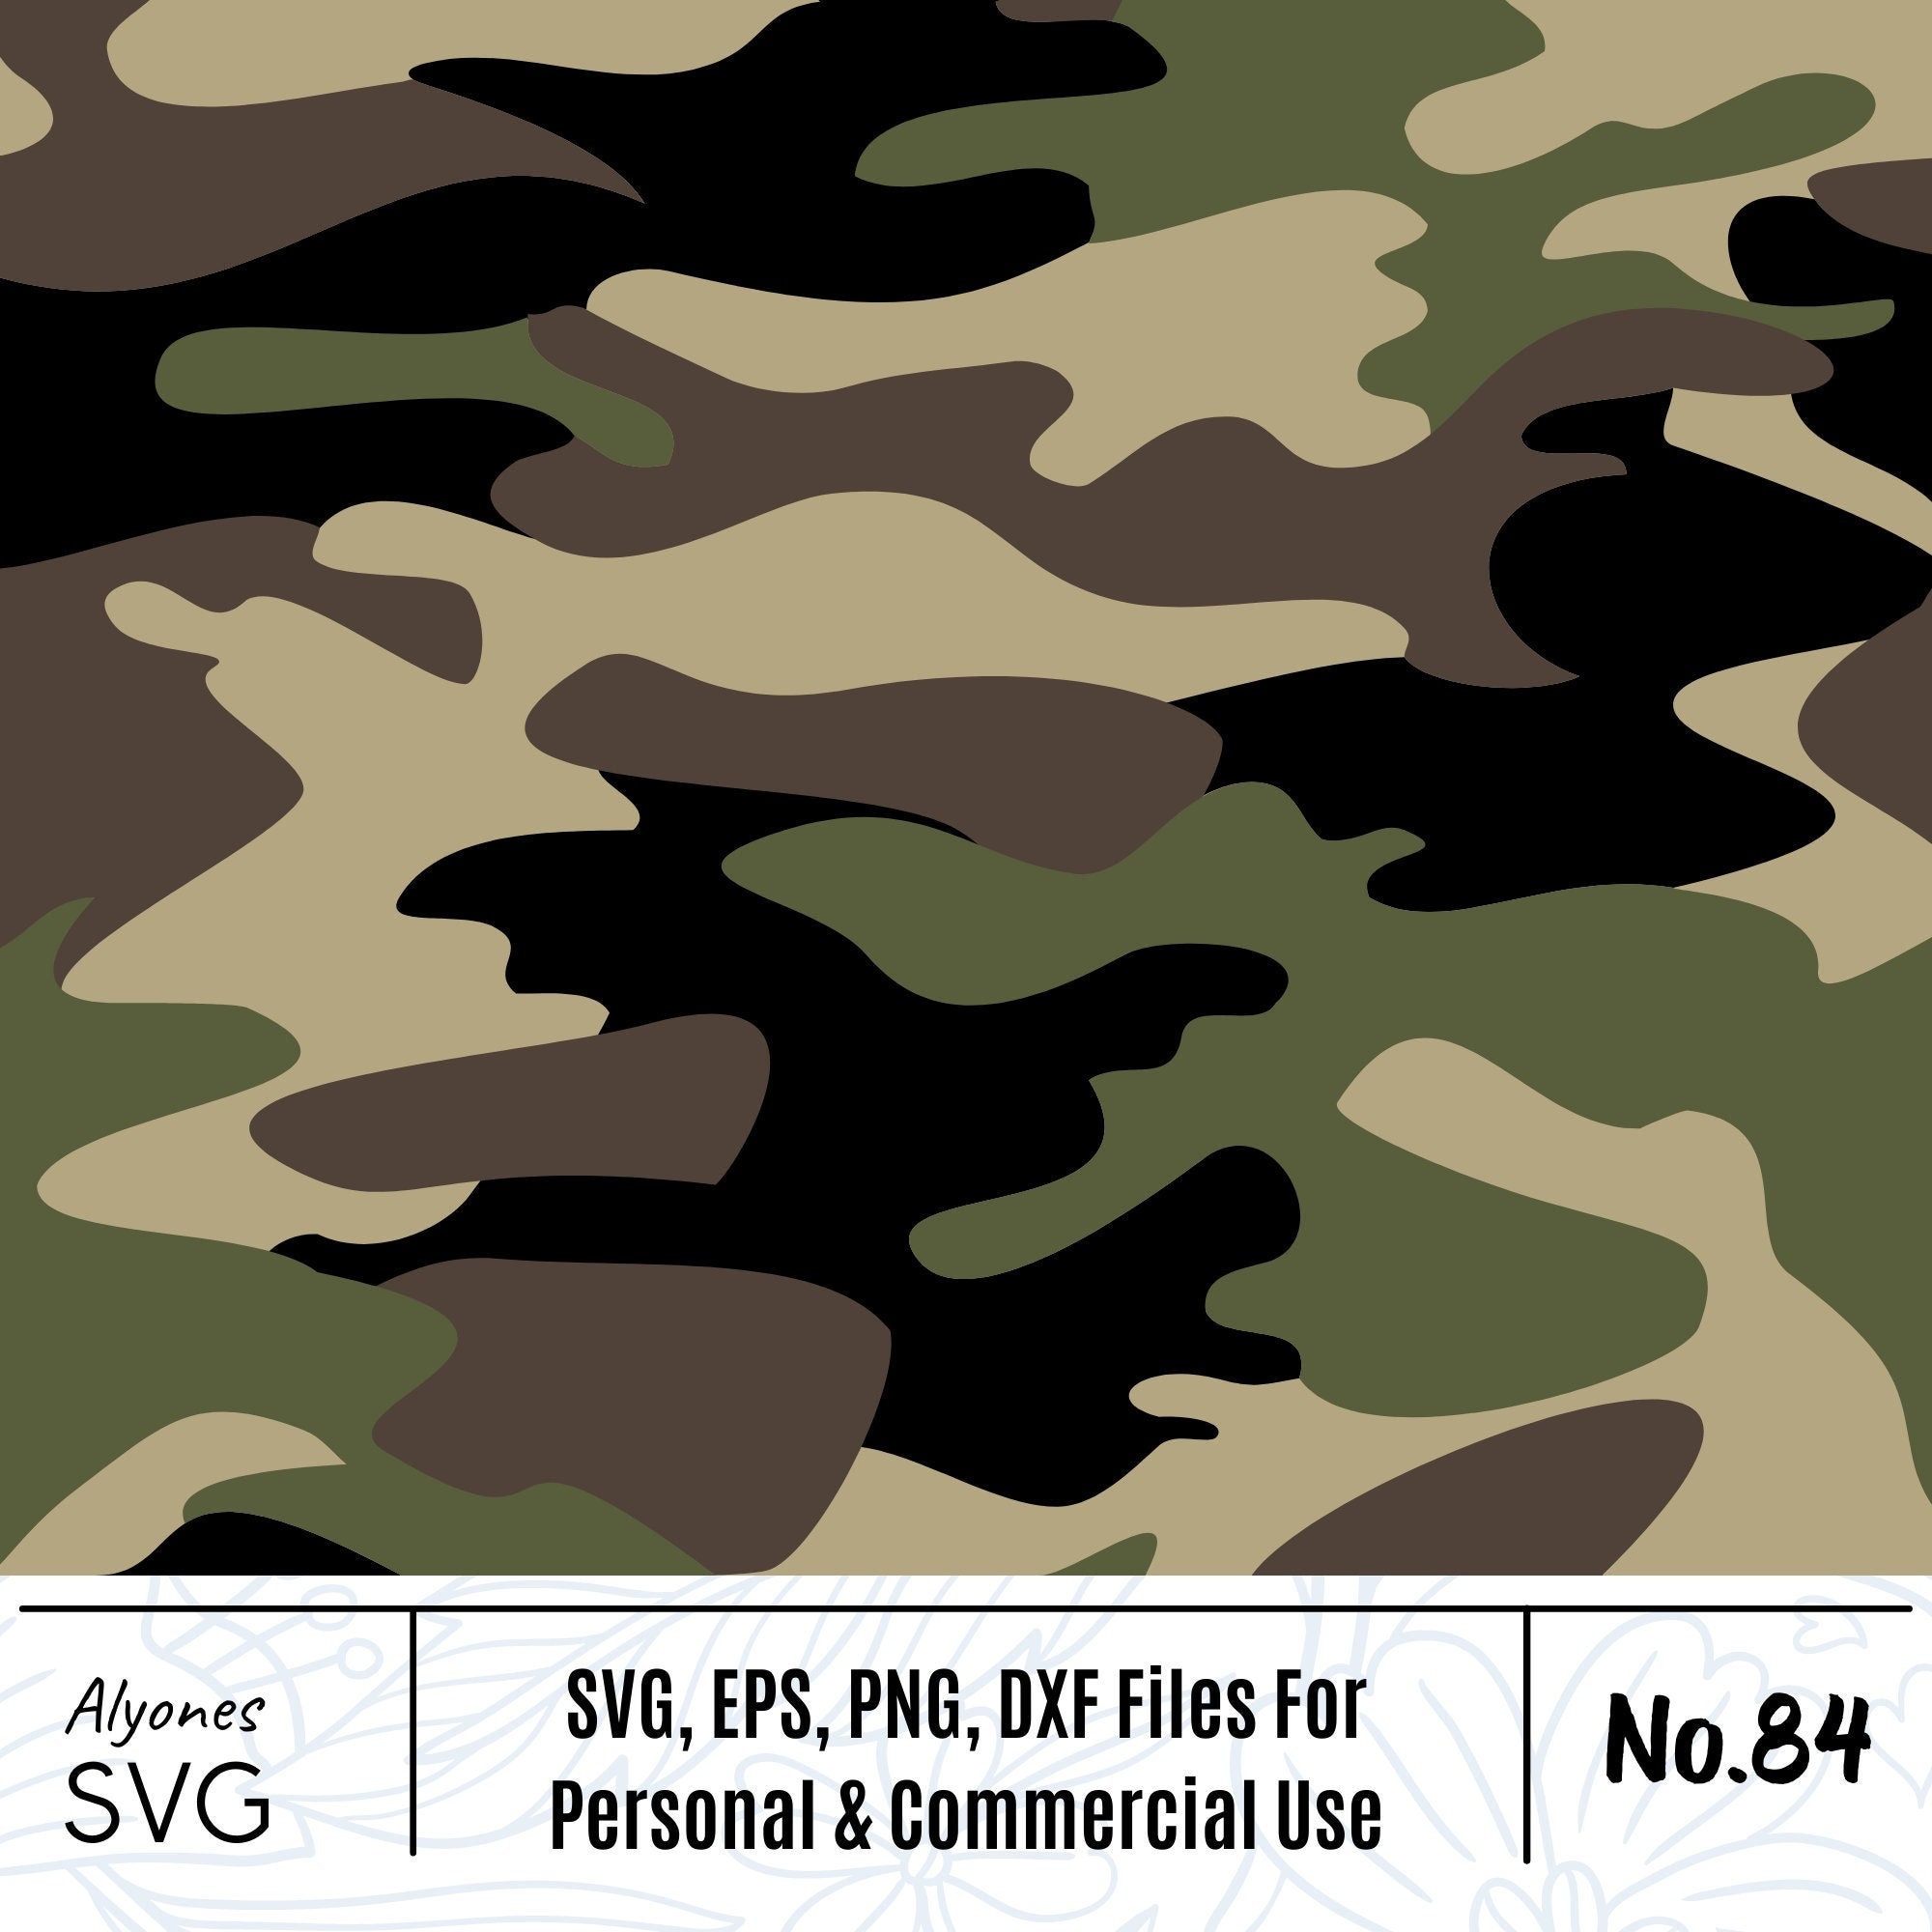 Stencil Stop Camouflage Stencil Set - Reusable Camo Stencils for DIY  Projects, Hunting, Fishing, Painting, Drawing, Crafts - 14 Mil Mylar  Plastic [12